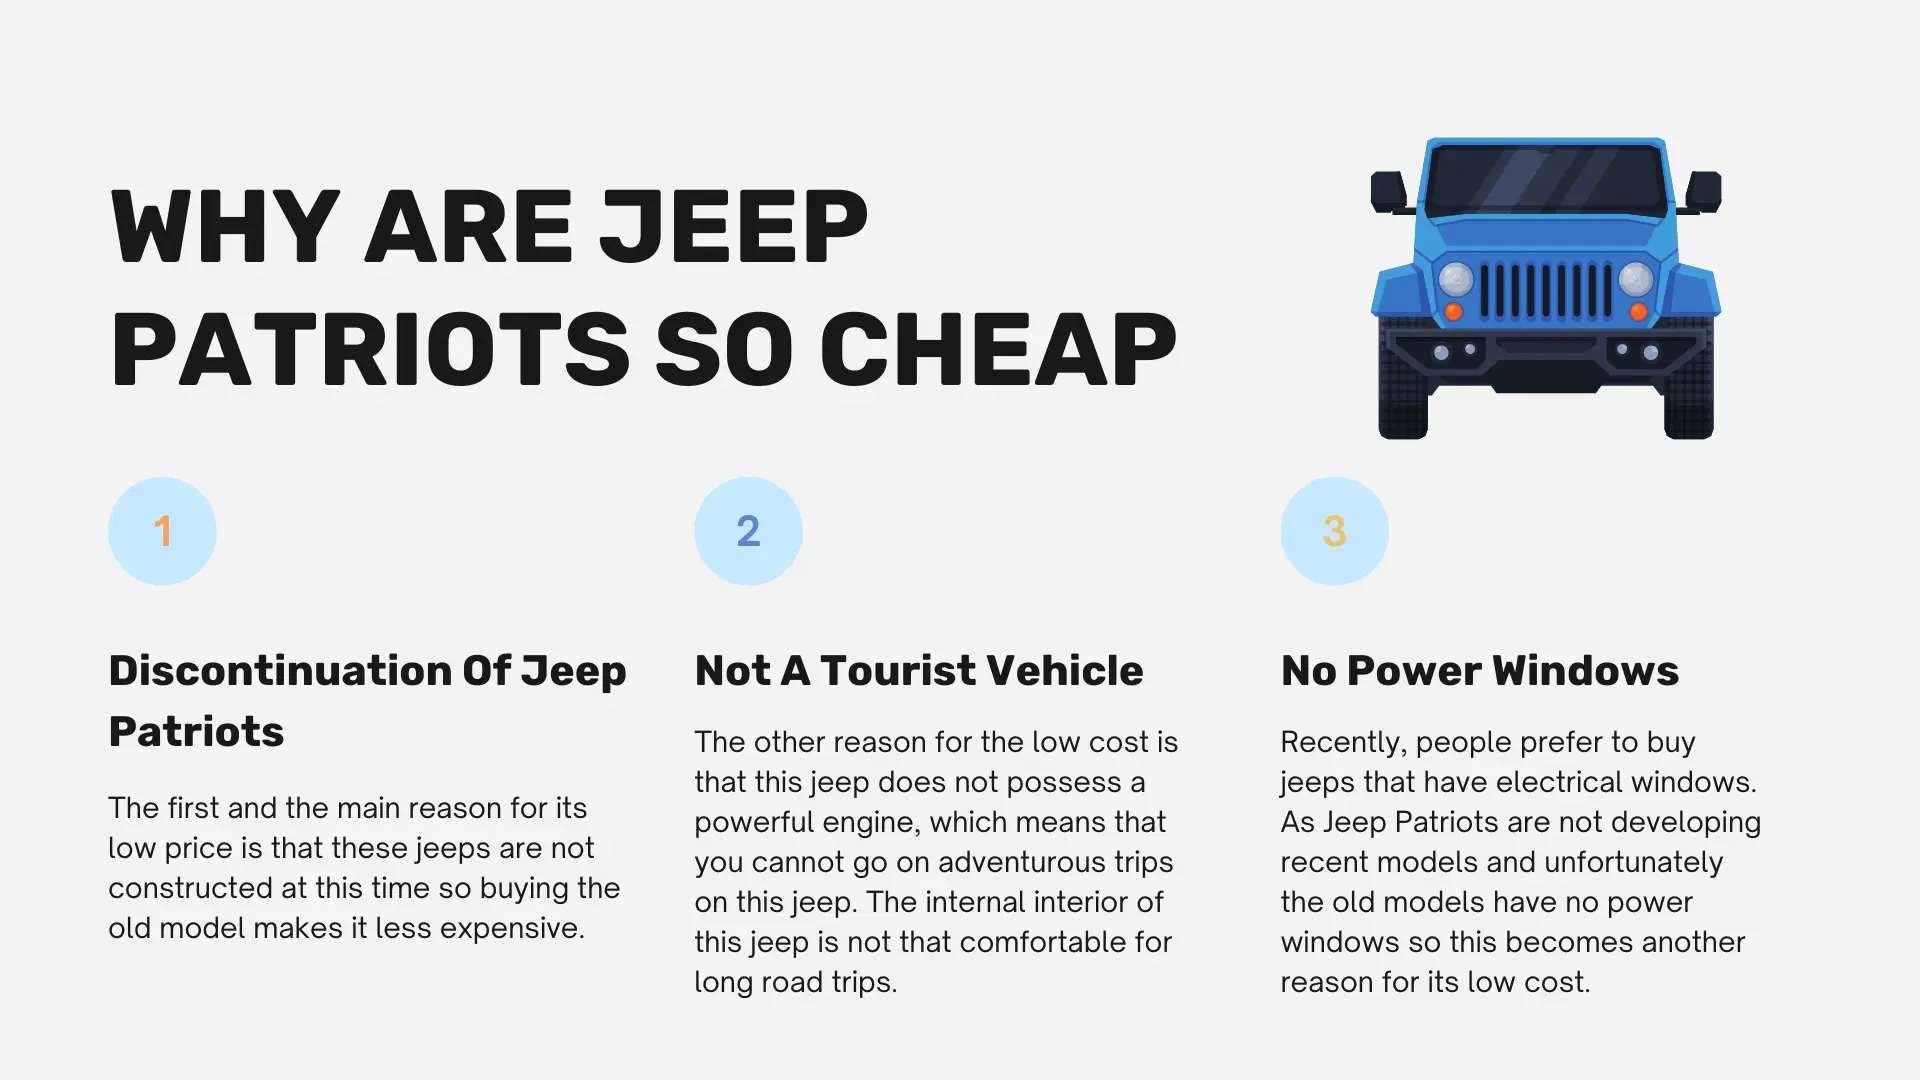 Why Are Jeep Patriots So Cheap